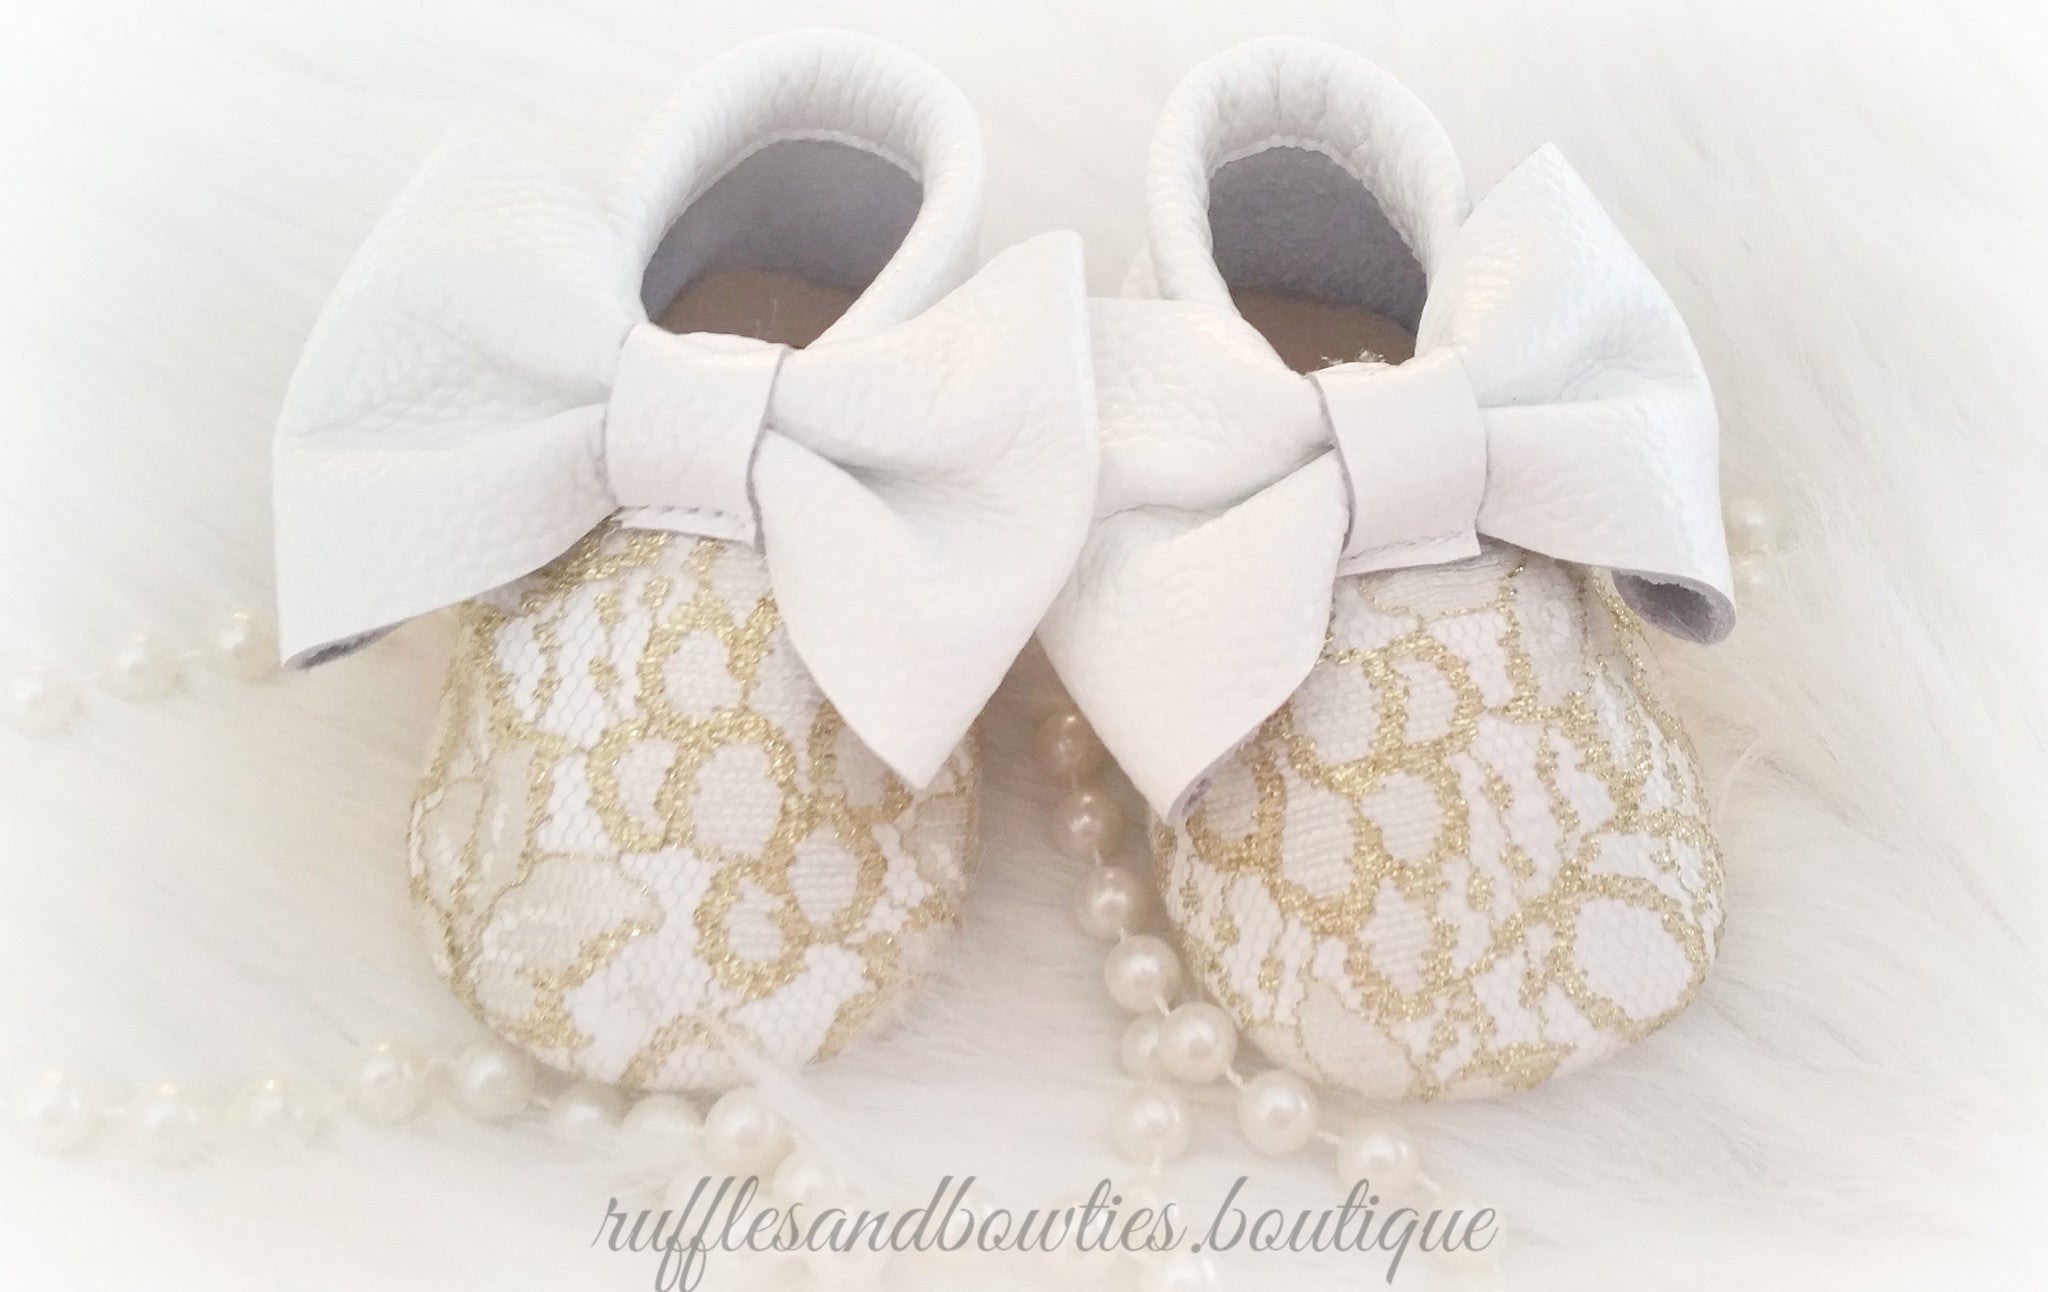 Baby Girl Lace leather Moccaisns - White  with Gold Lace Big Bow Leather Baby Moccasins - Baby Girl Moccasins - Bow Moccasins - Gold Bow Moccasins  - Soft Shoes - Lace Moccasins